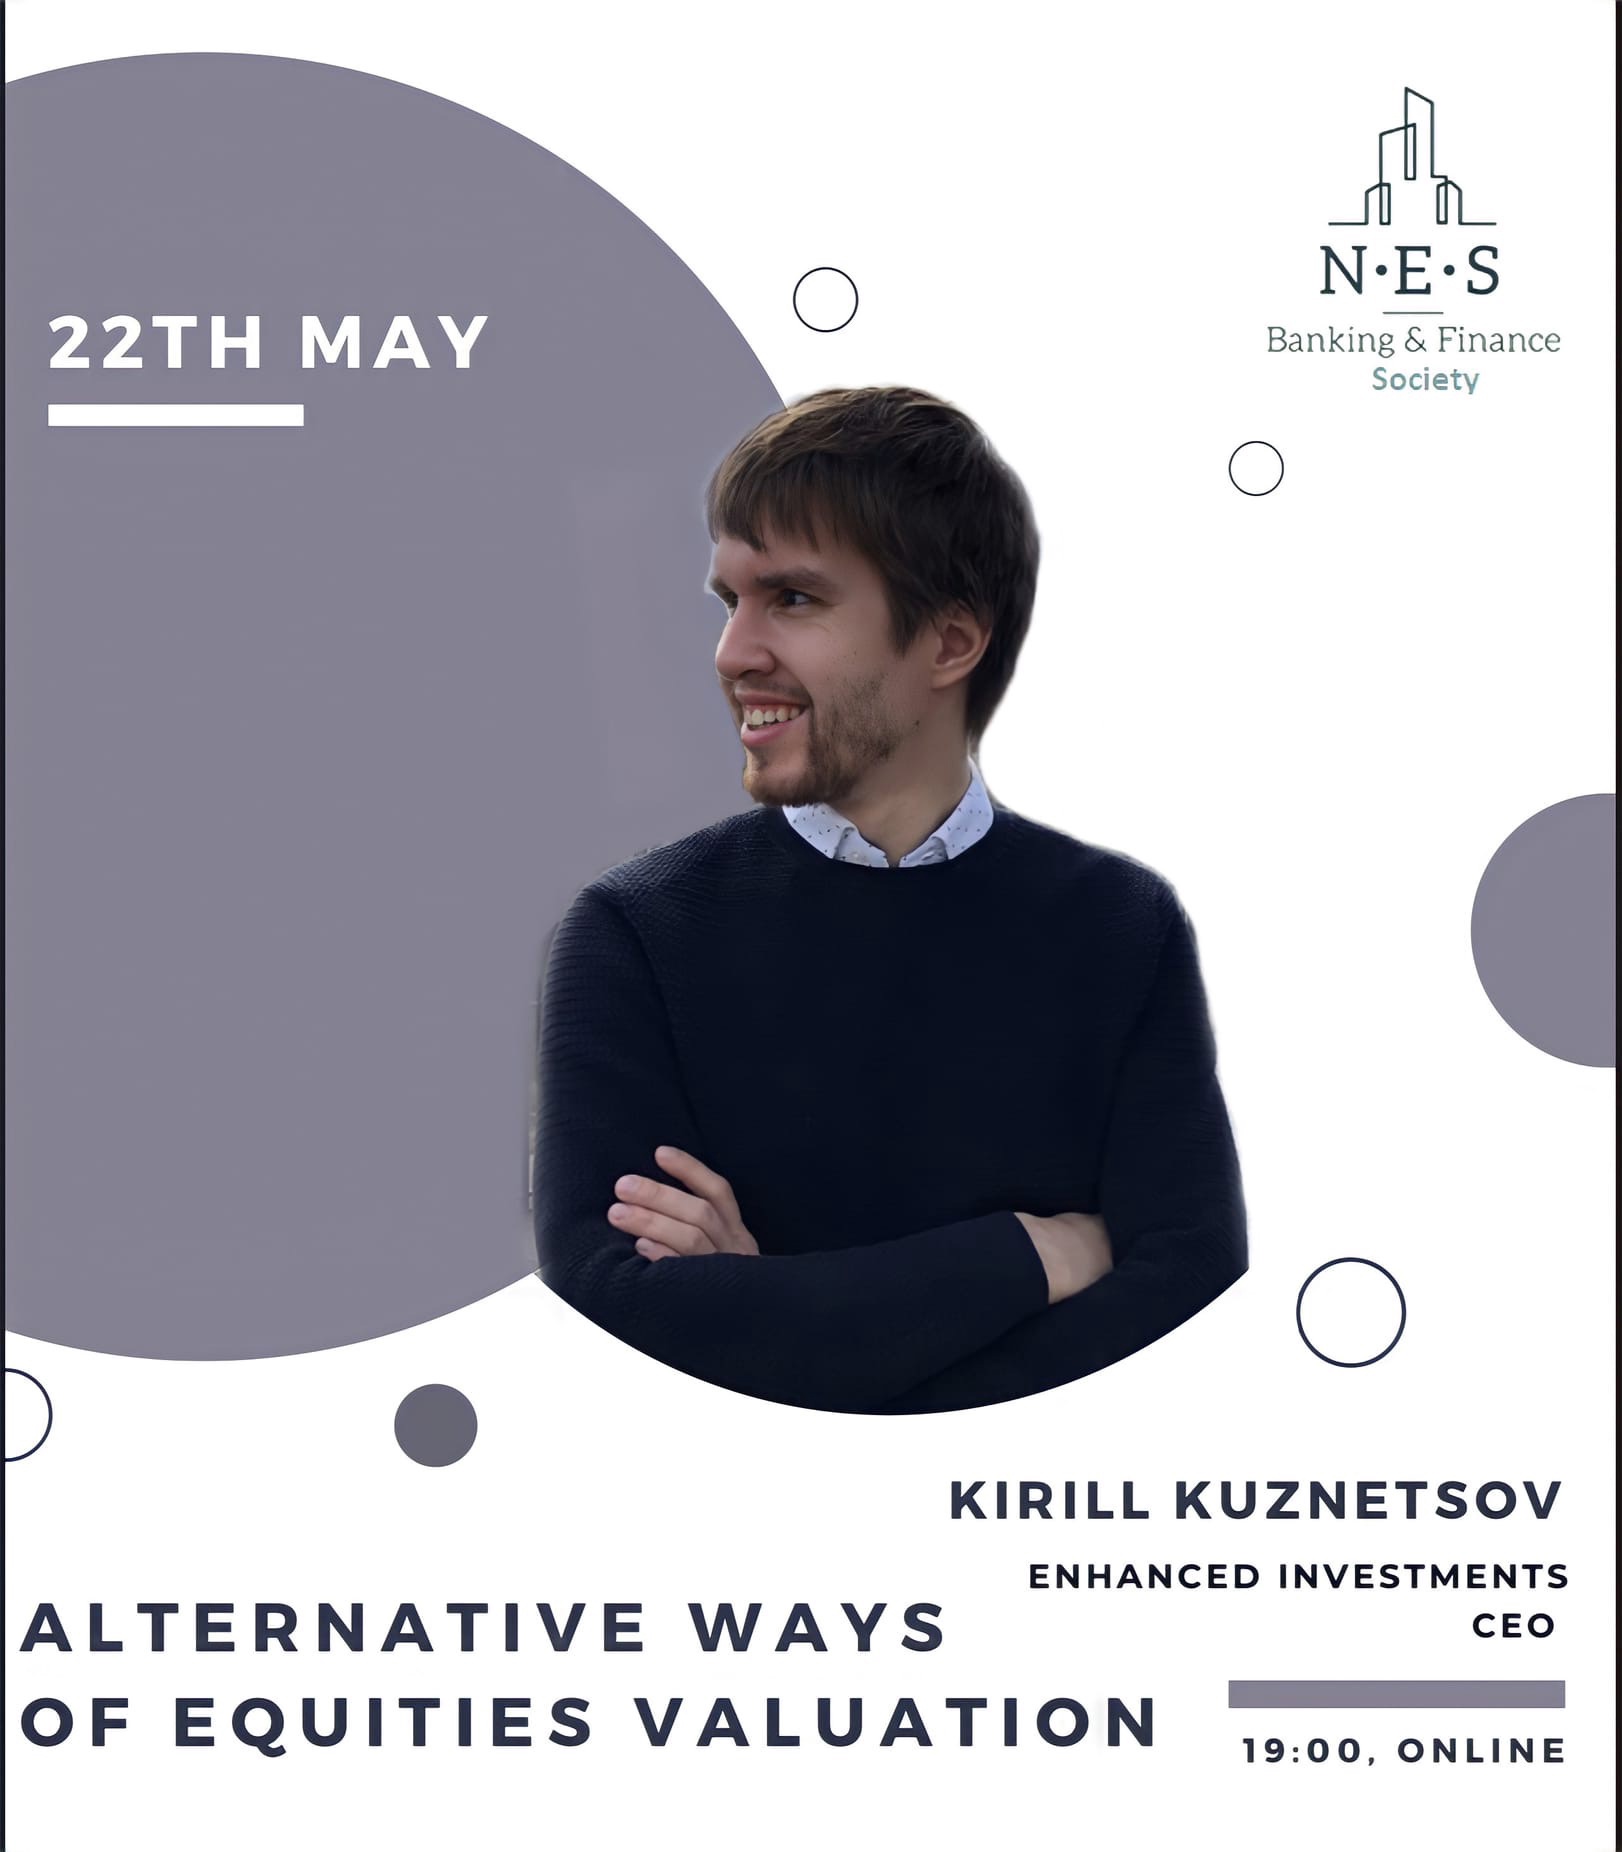 Kirill Kuznetsov – CEO of Enhanced Investments, a data-driven investment company